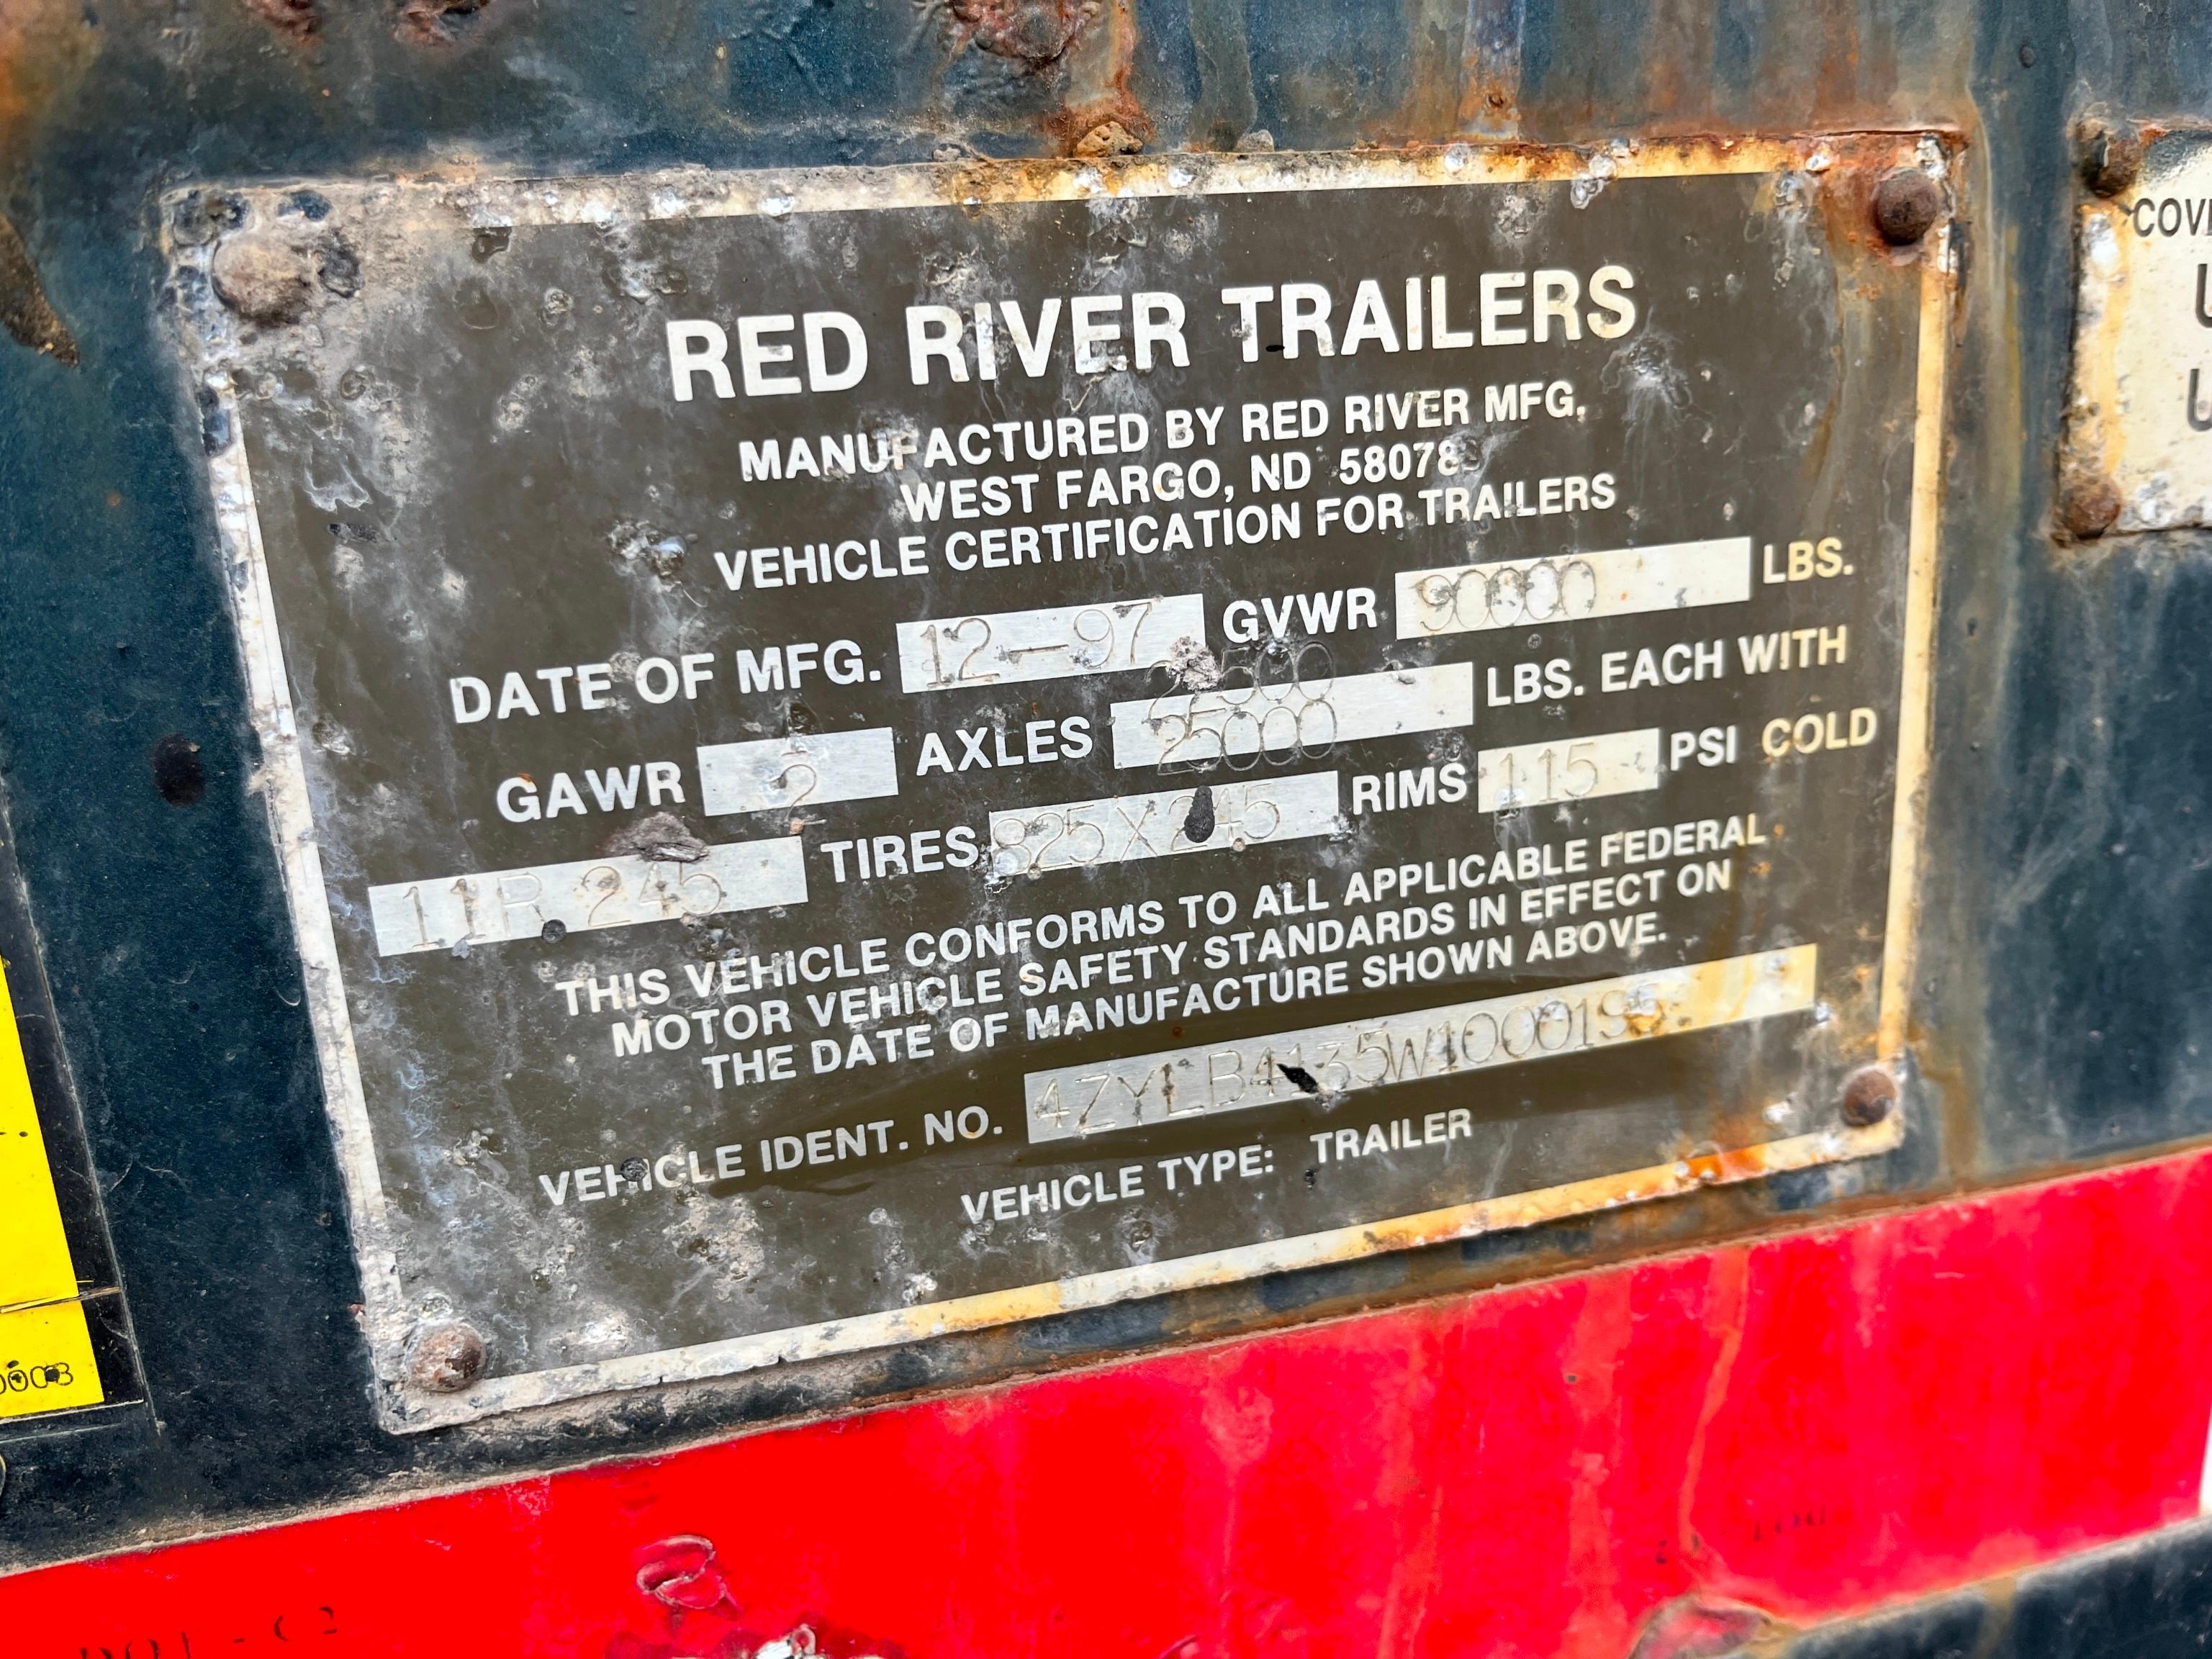 1998 RED RIVER LIVE BOTTOM TRAILER VN:4ZYLB4135W1000195 equipped with 90,000lbGVWR, spring